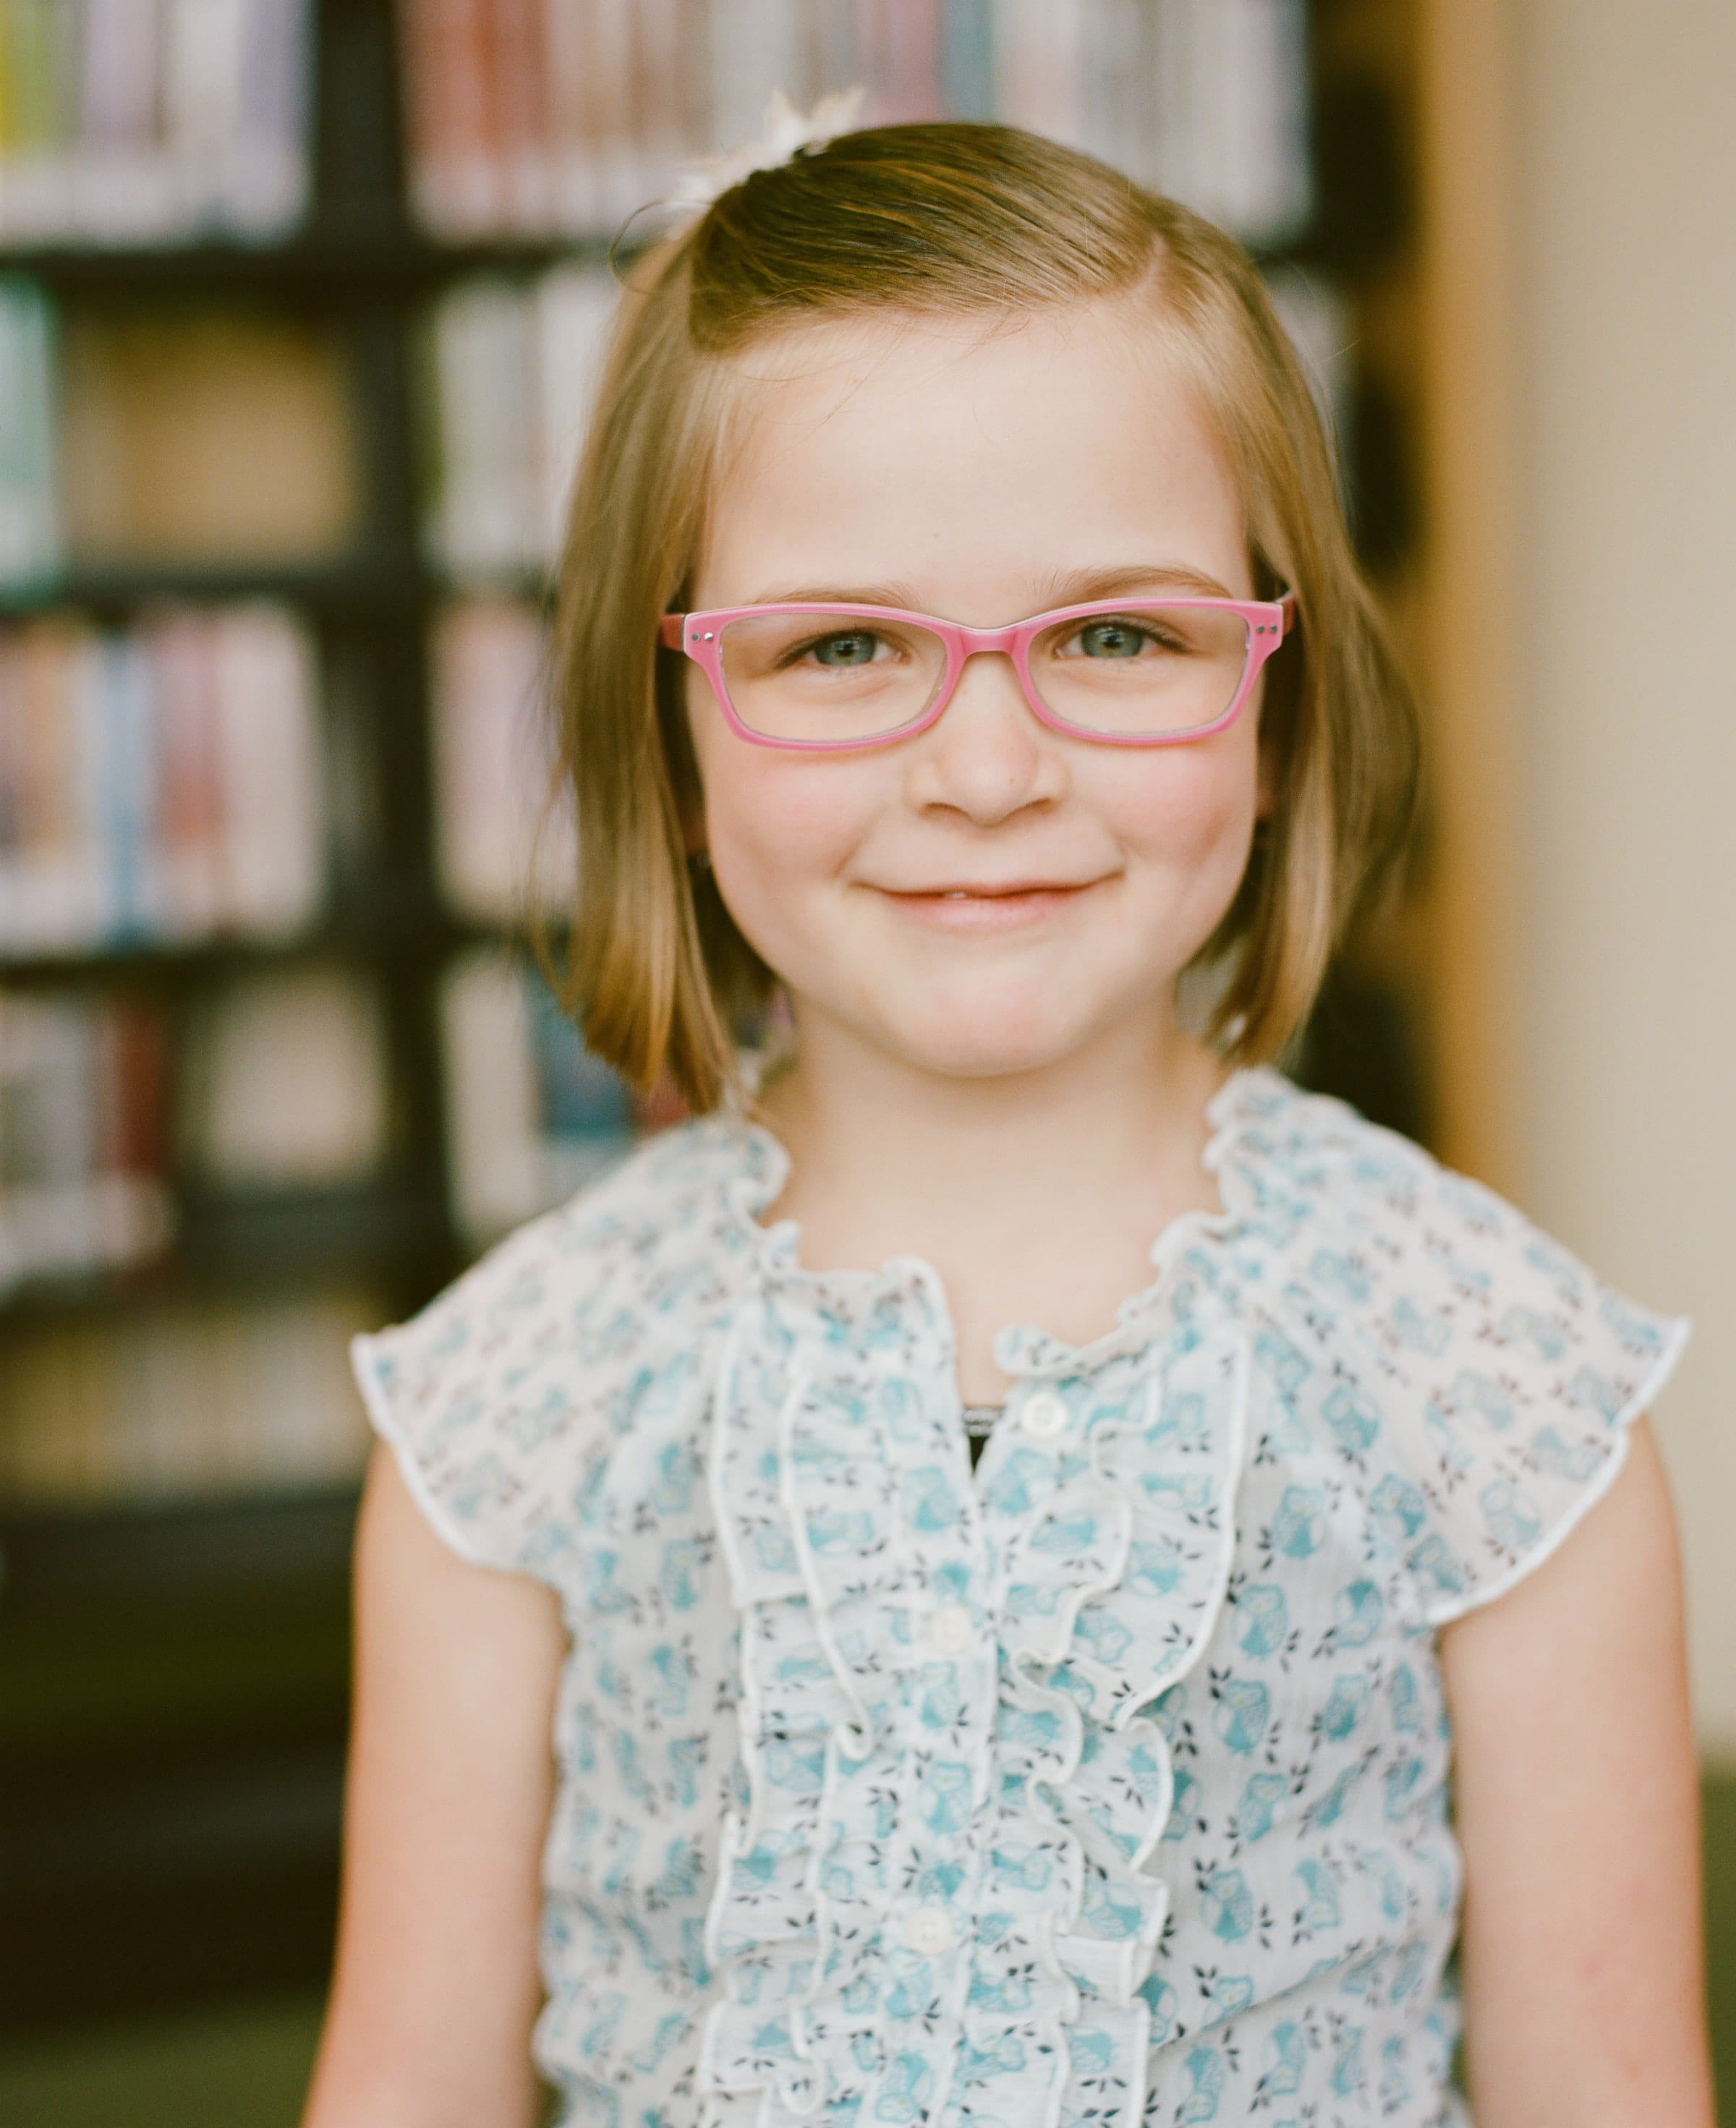 child with glasses